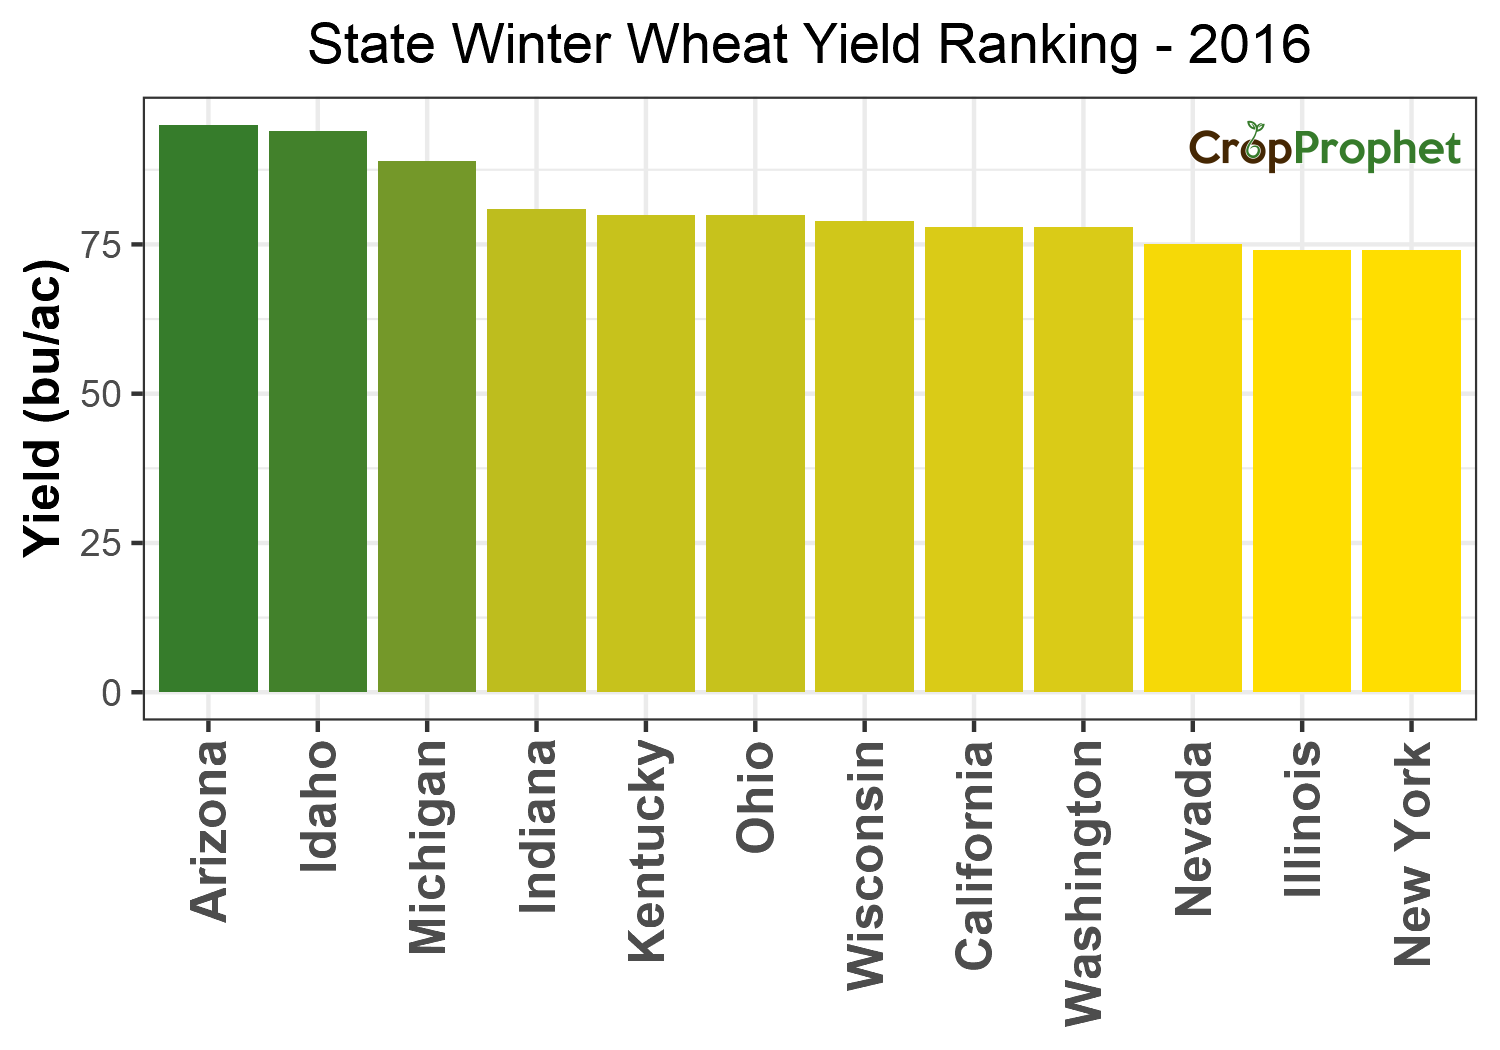 Winter wheat Production by State - 2016 Rankings